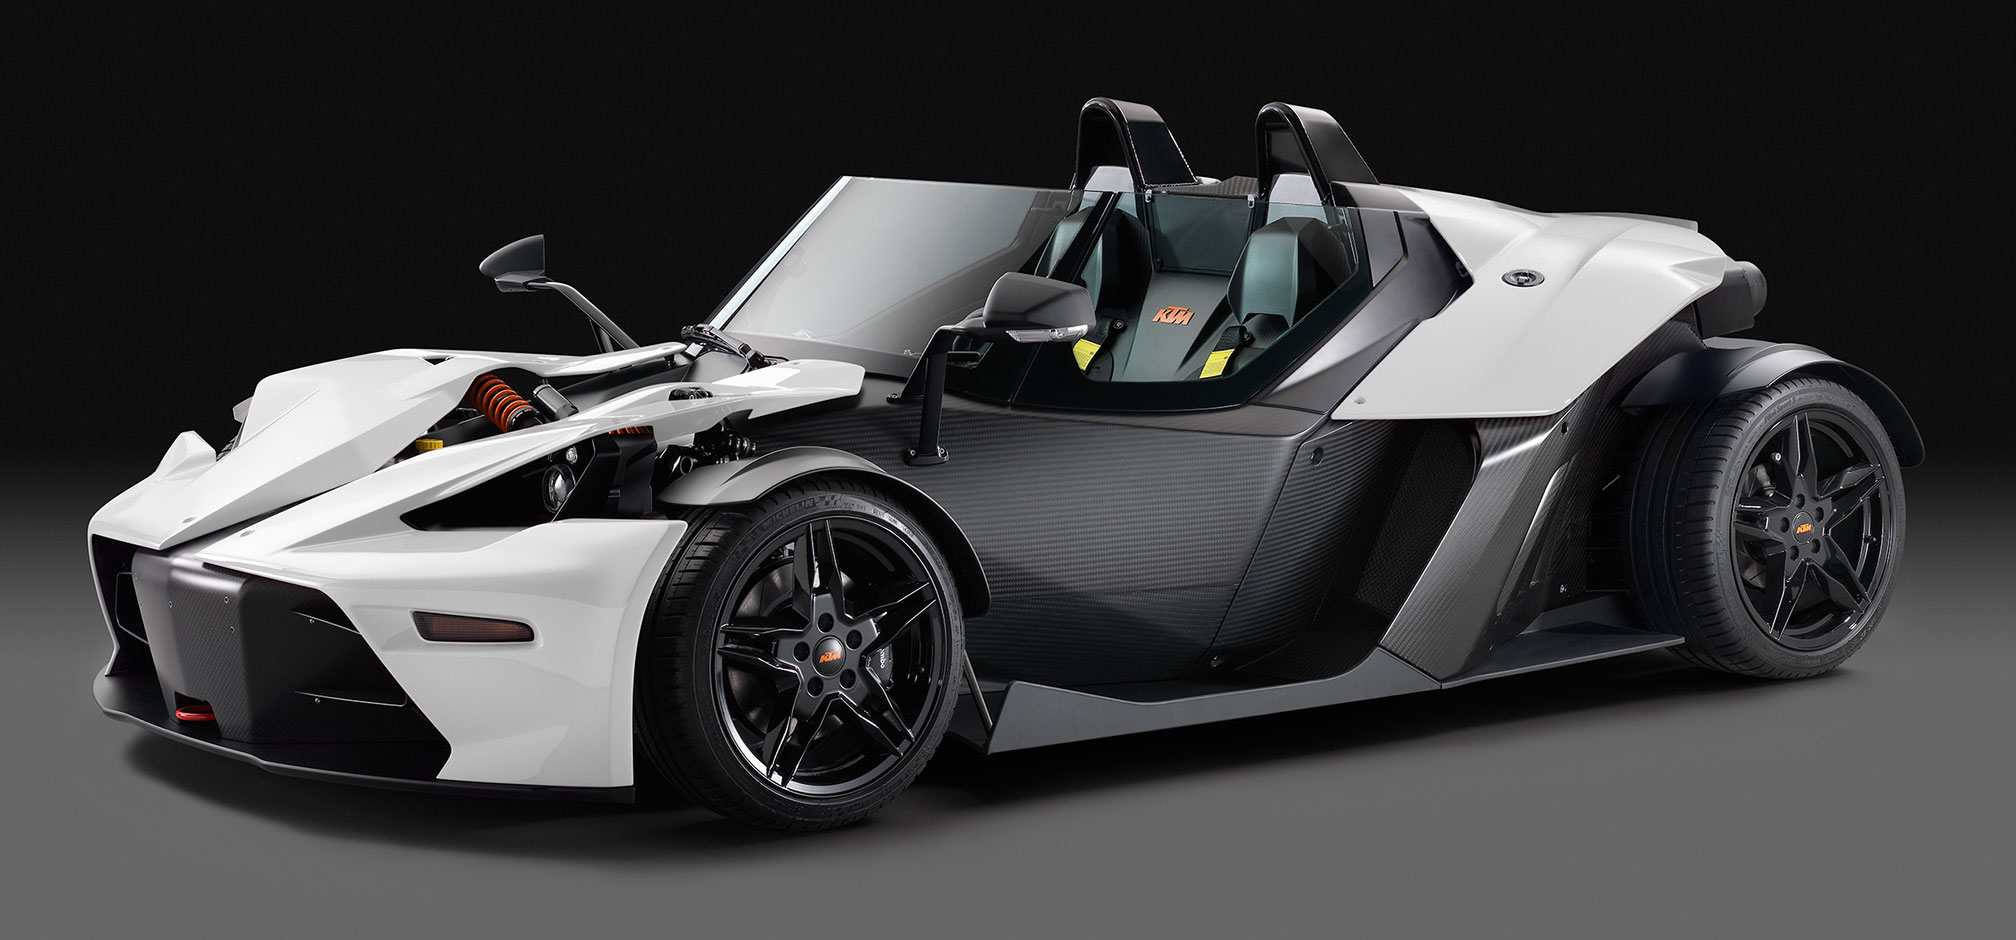 Nice Images Collection: KTM X-Bow Desktop Wallpapers